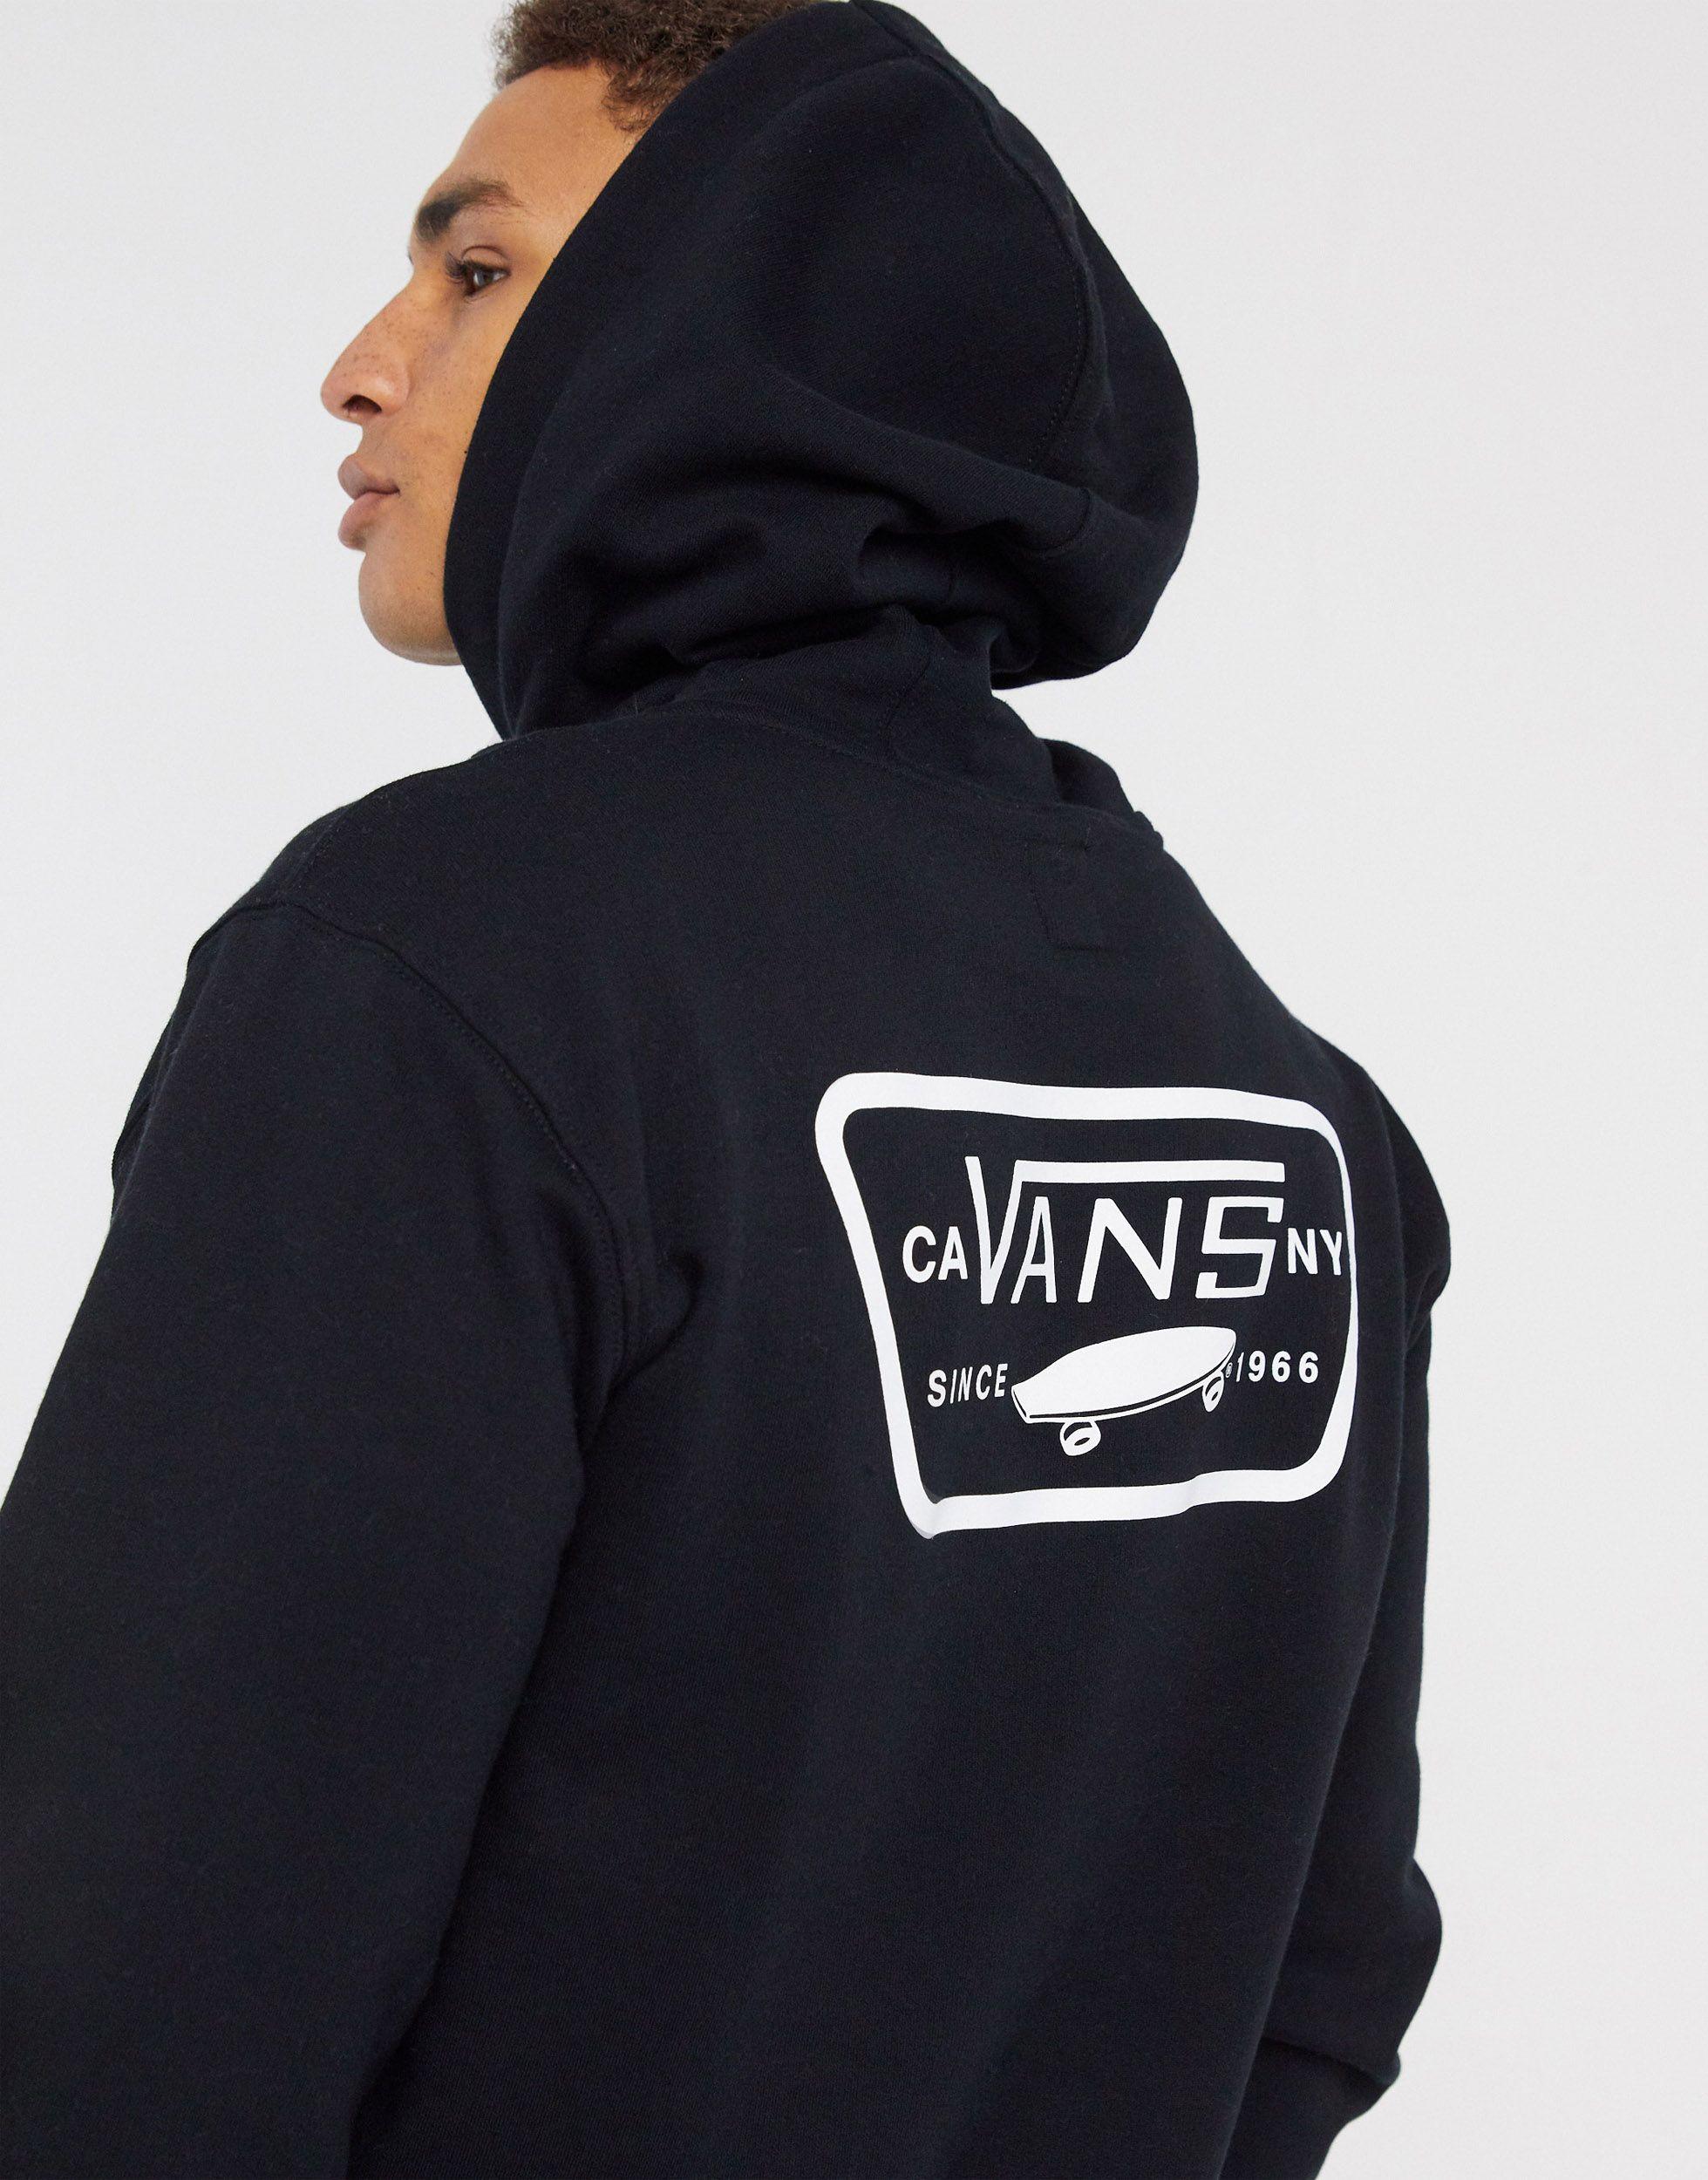 vans full patched pullover hoodie - studytours.cl